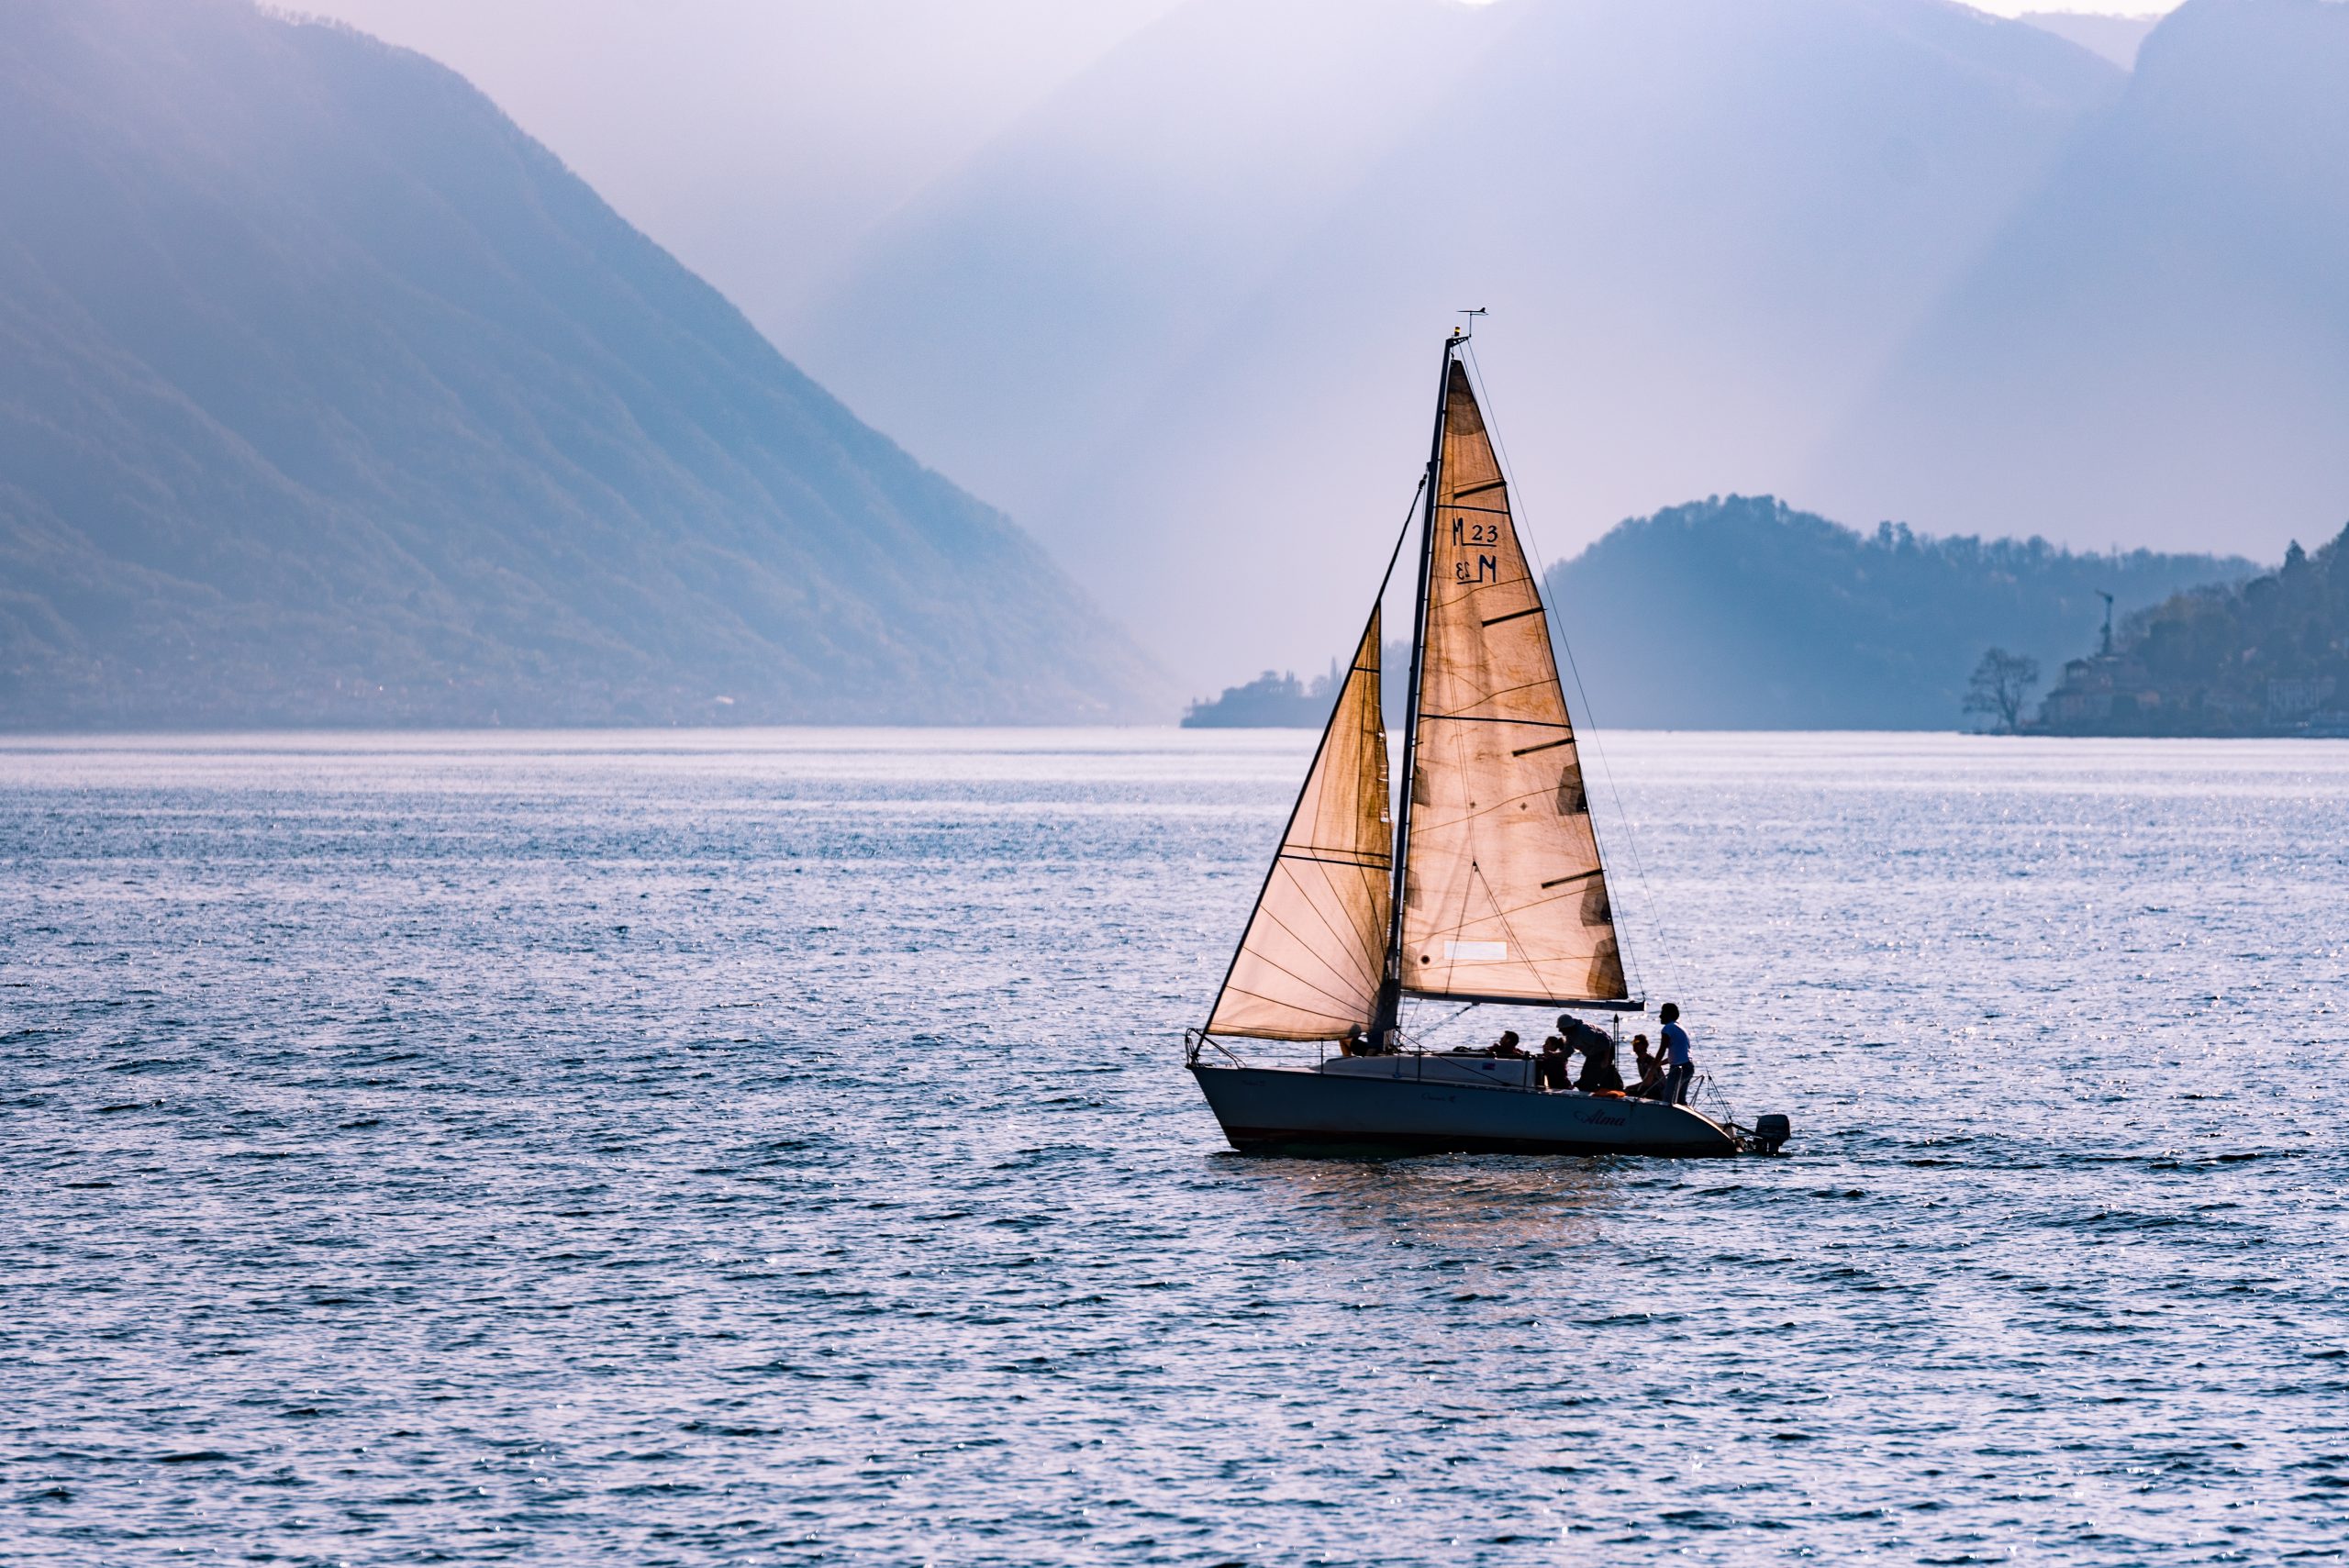 Beautiful shot of a sailing boat travelling across the sea surrounded by mountains